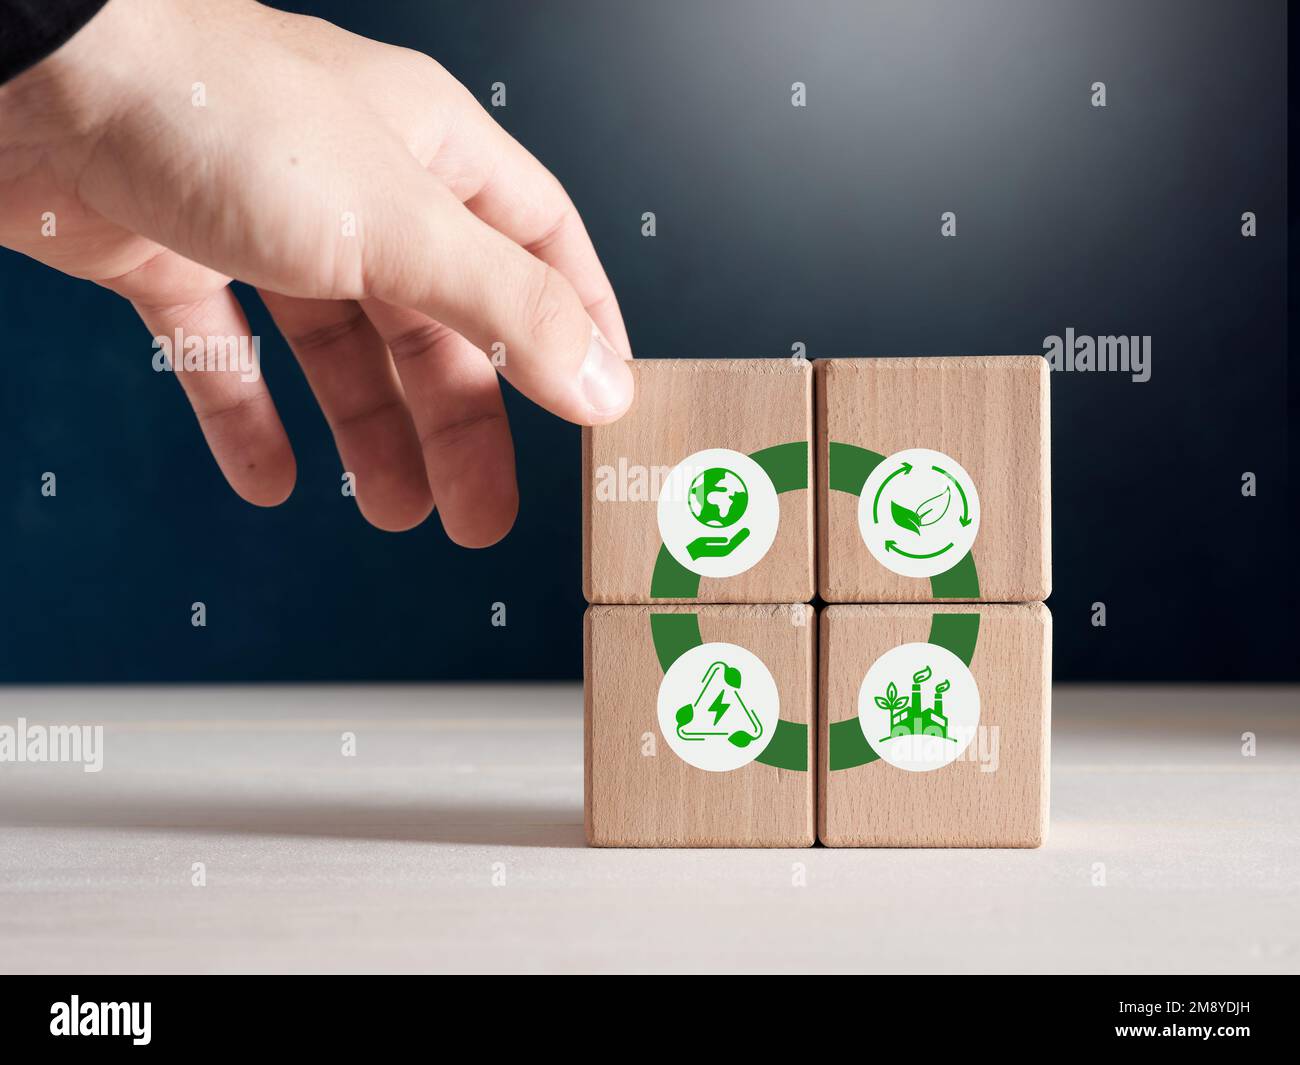 Sustainable development, environmental protection, renewable energy and circular economy concept. Male hand puts wooden cubes with circular economy ic Stock Photo